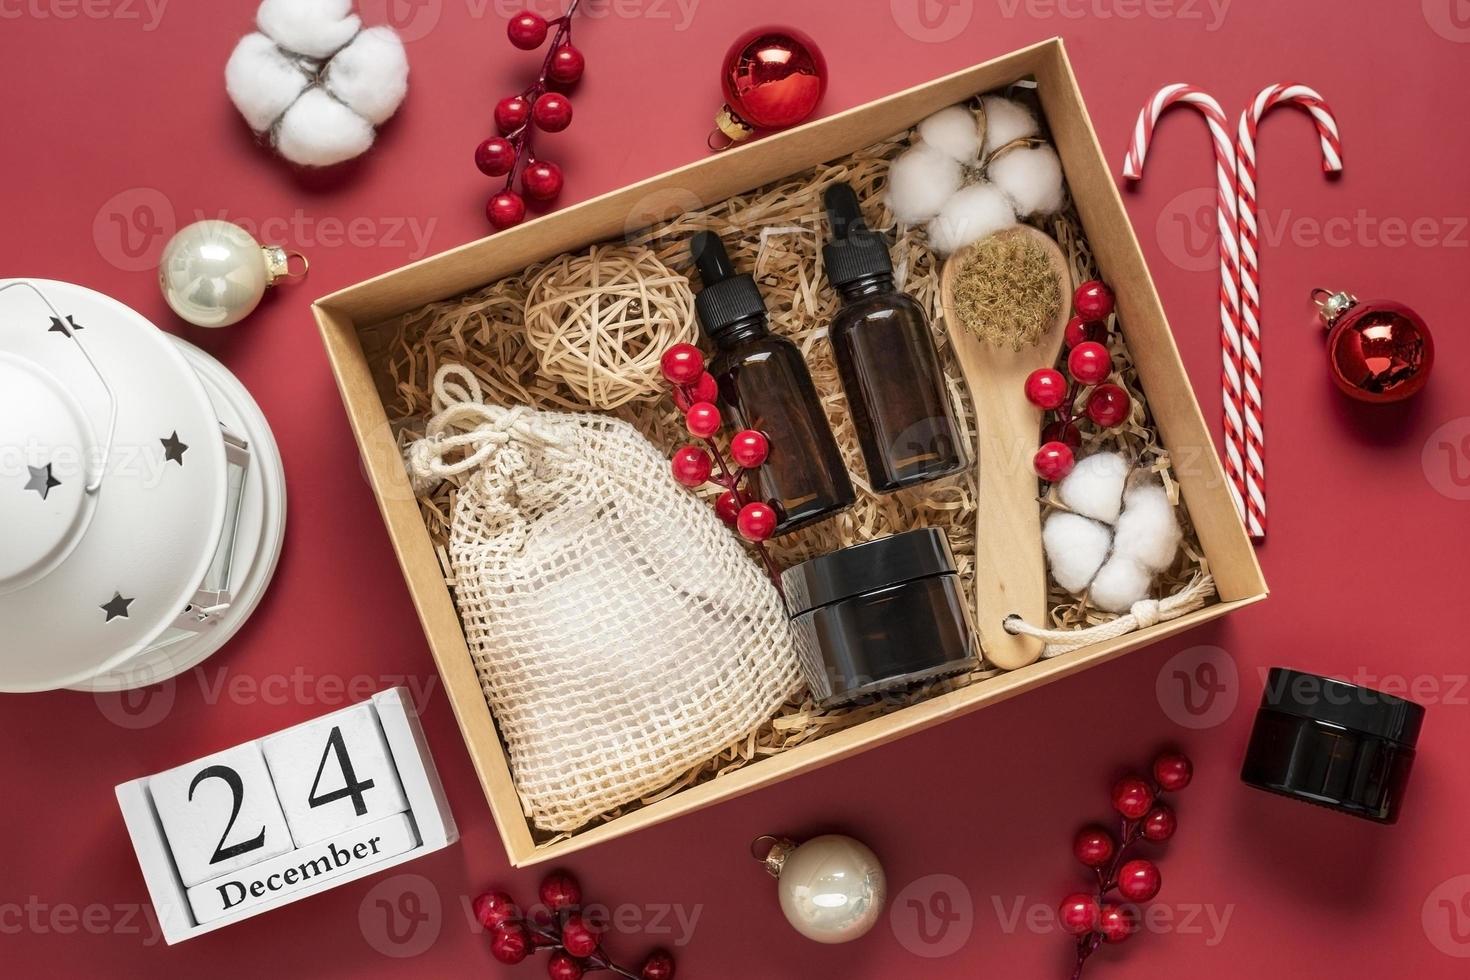 Set for care box Eco-friendly cosmetics Oil and cream bottles, brush for washing, cotton pads on red background Gift for girlfriend, mother to celebrate Christmas concept Top view Flat lay photo